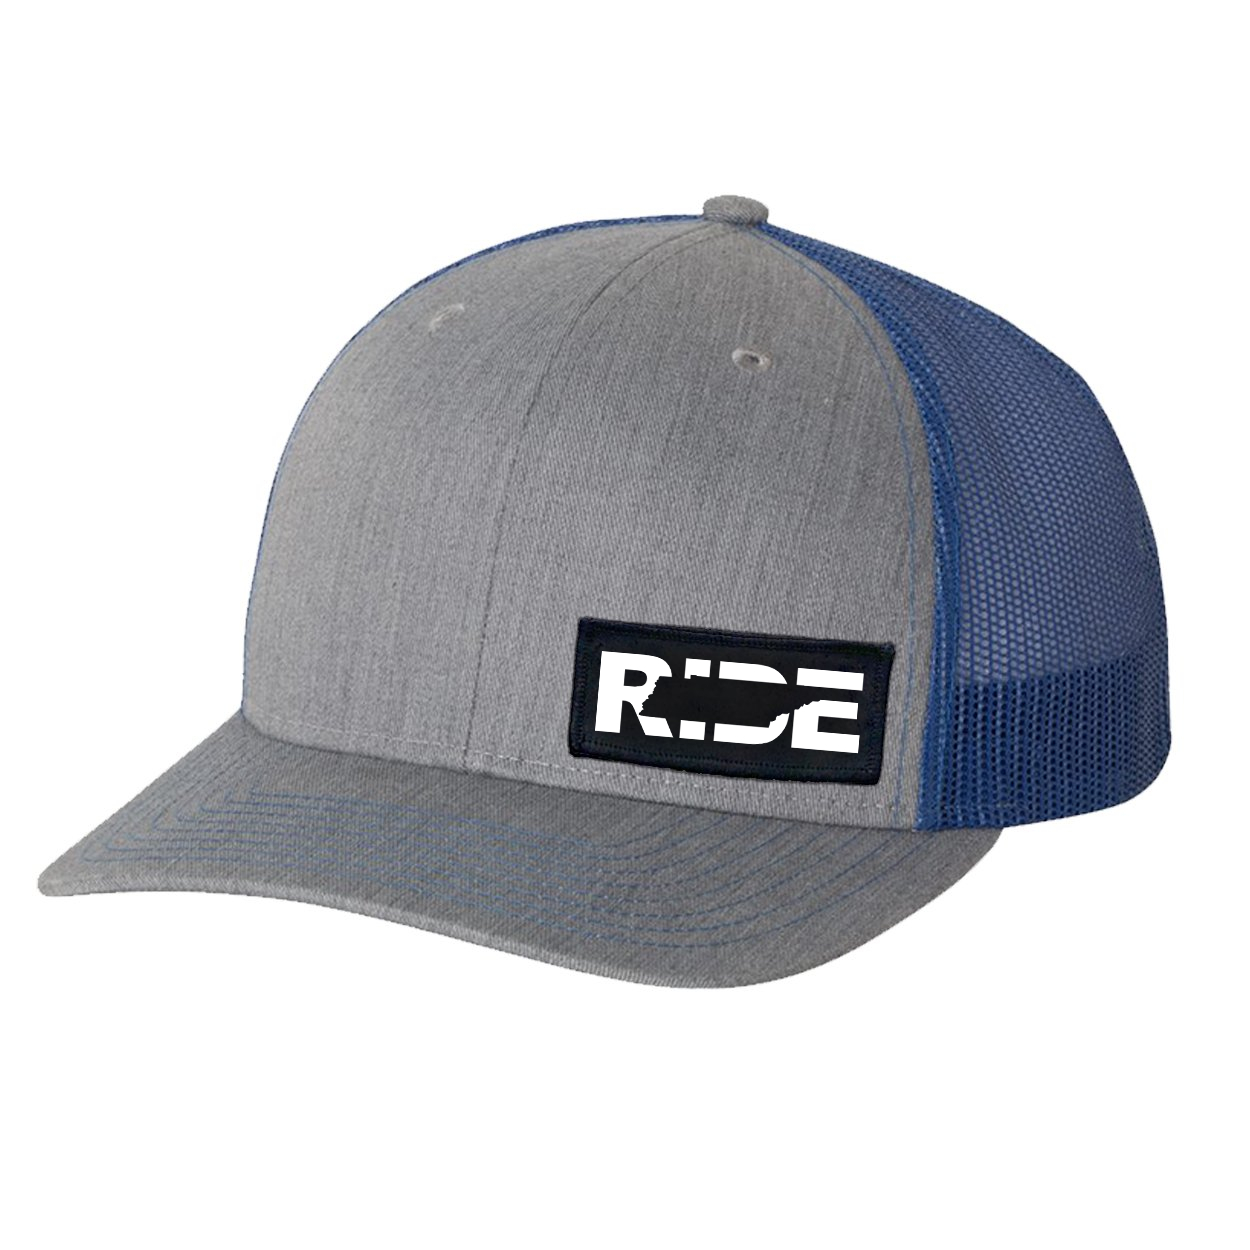 Ride Tennessee Night Out Woven Patch Snapback Trucker Hat Heather Grey/Royal (White Logo)